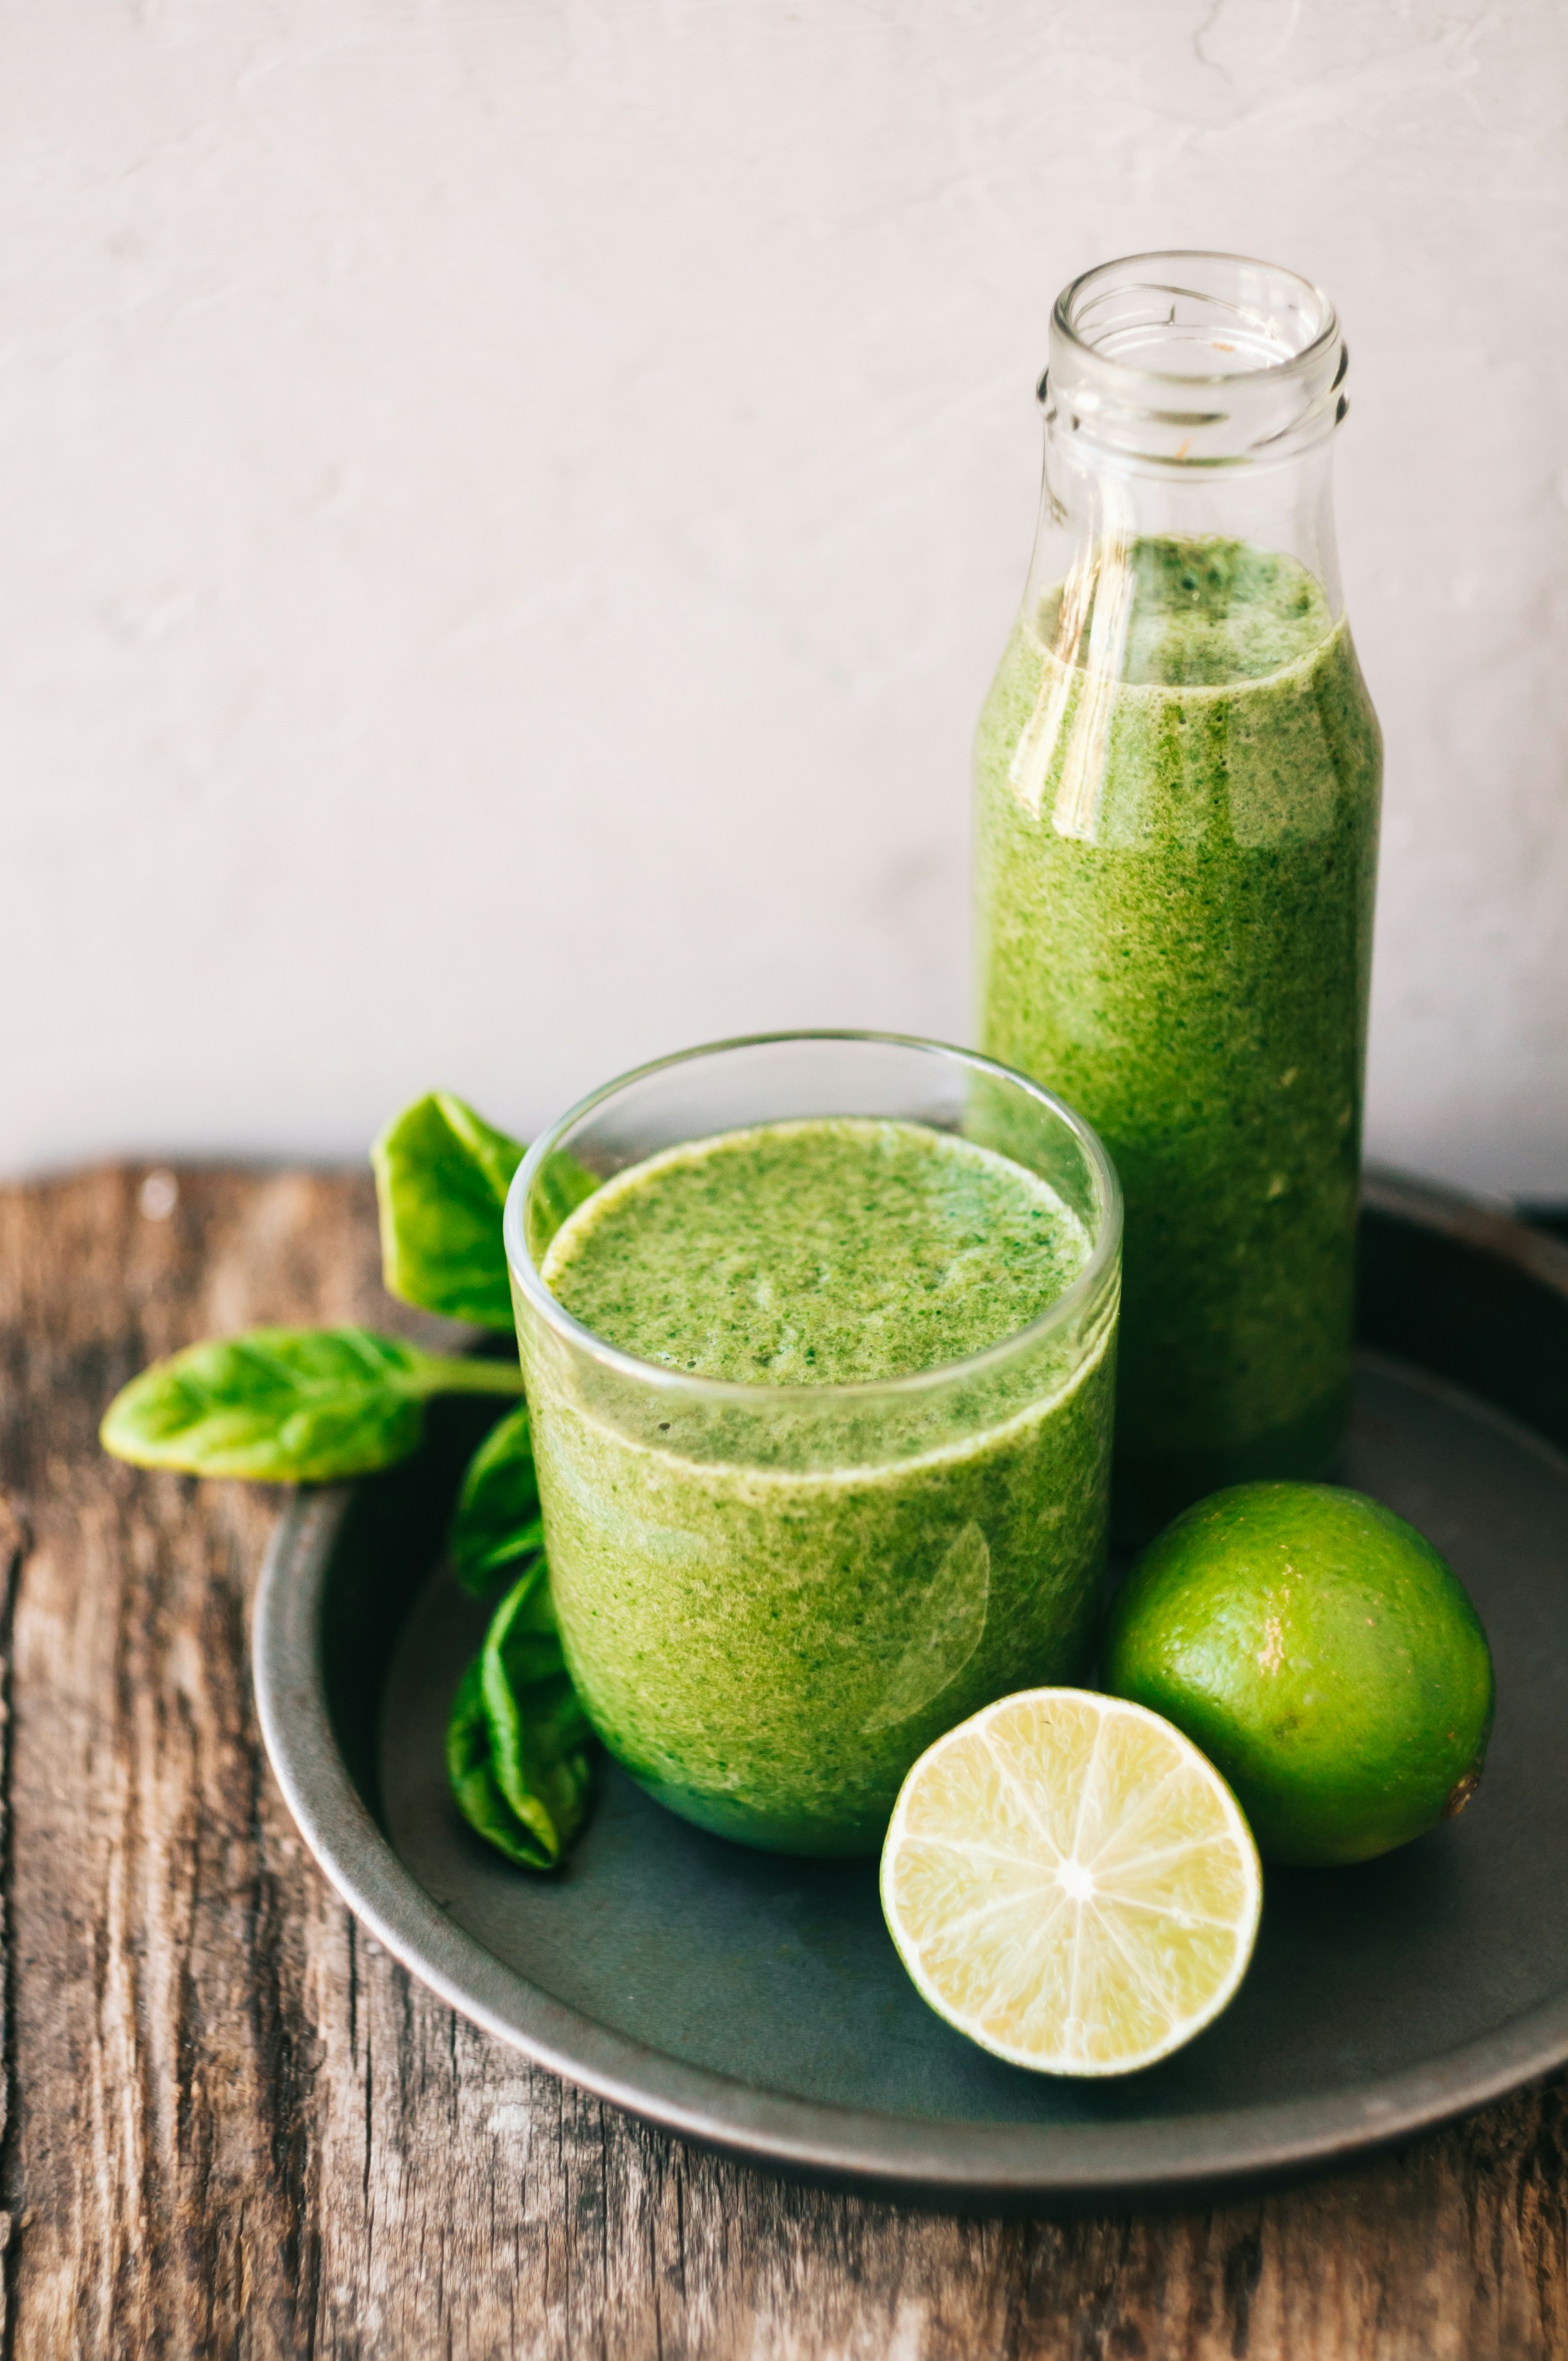 Bottle and glass of green juice | Source: Unsplash